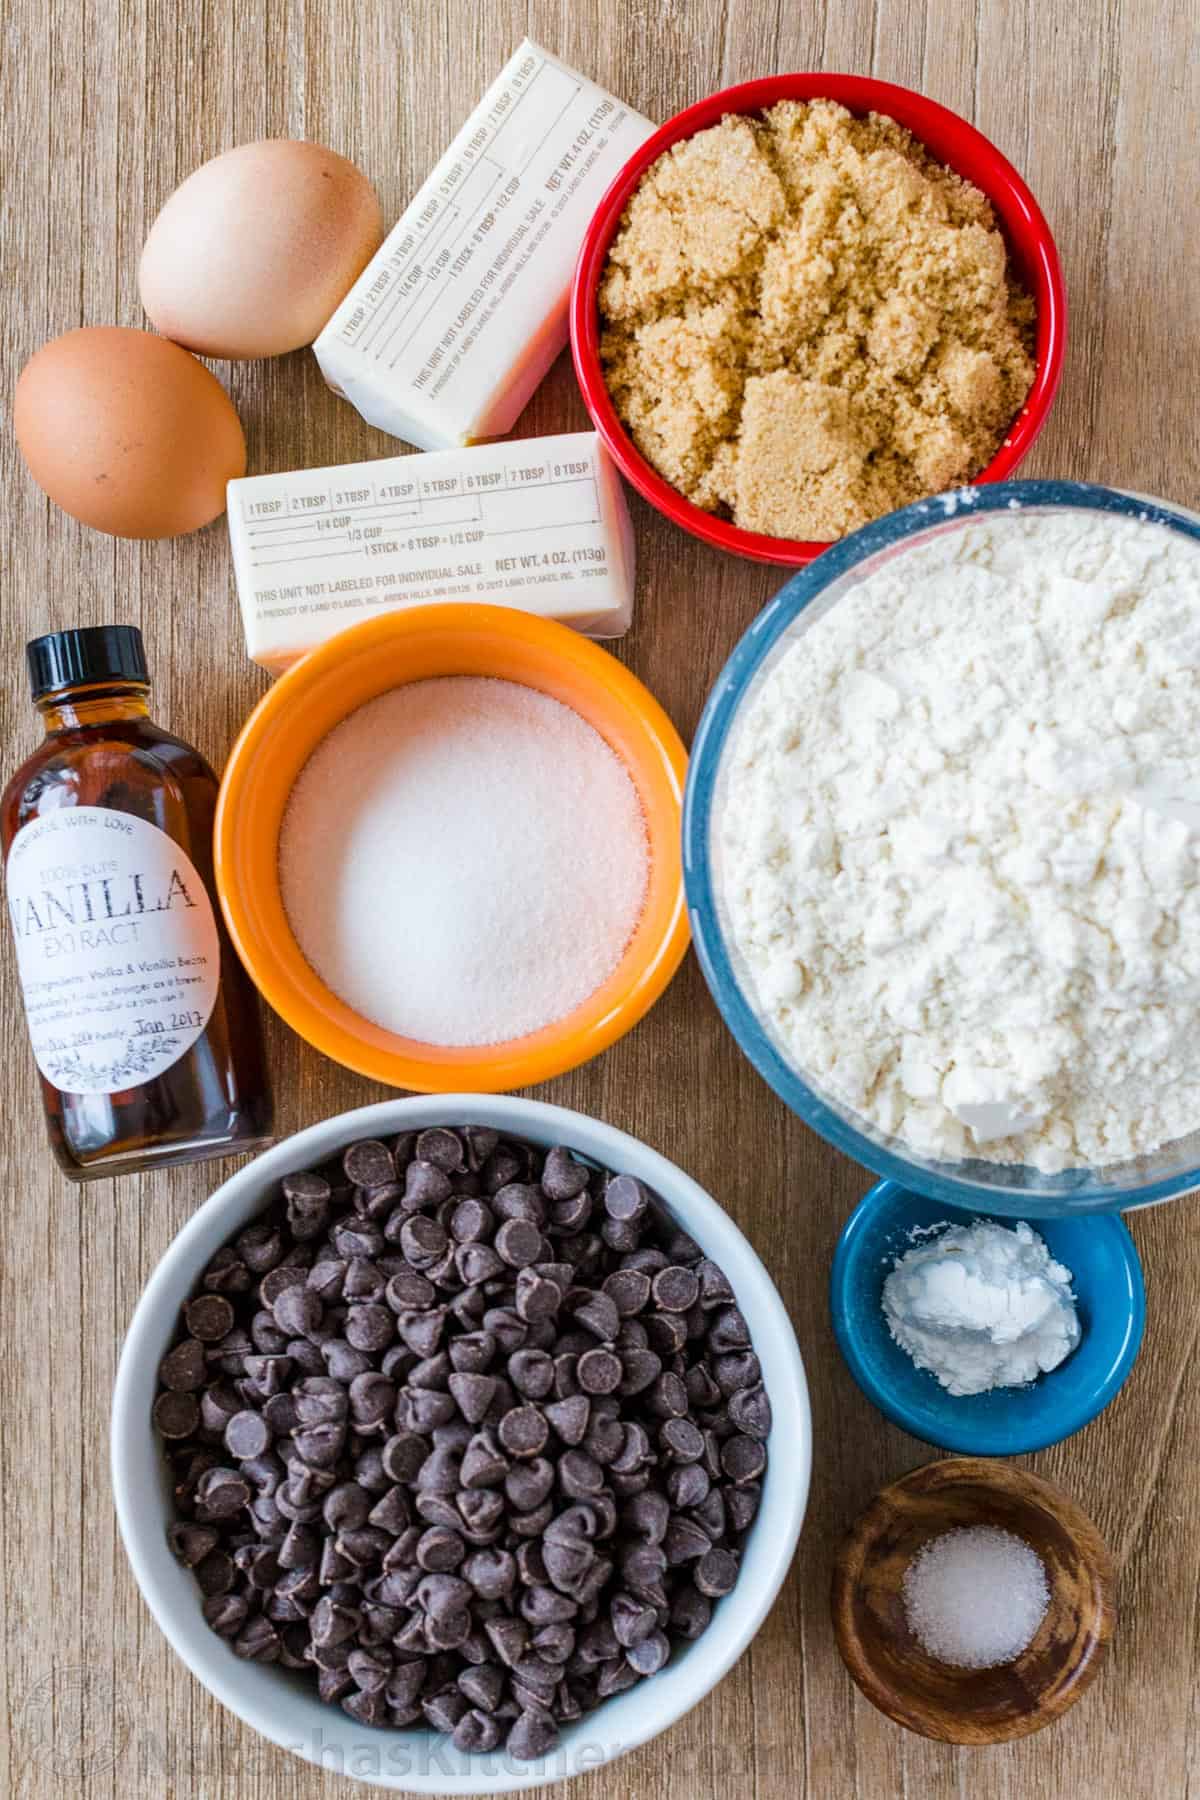 Ingredients for desserts with baking soda, brown sugar, chocolate morsals, butter and eggs